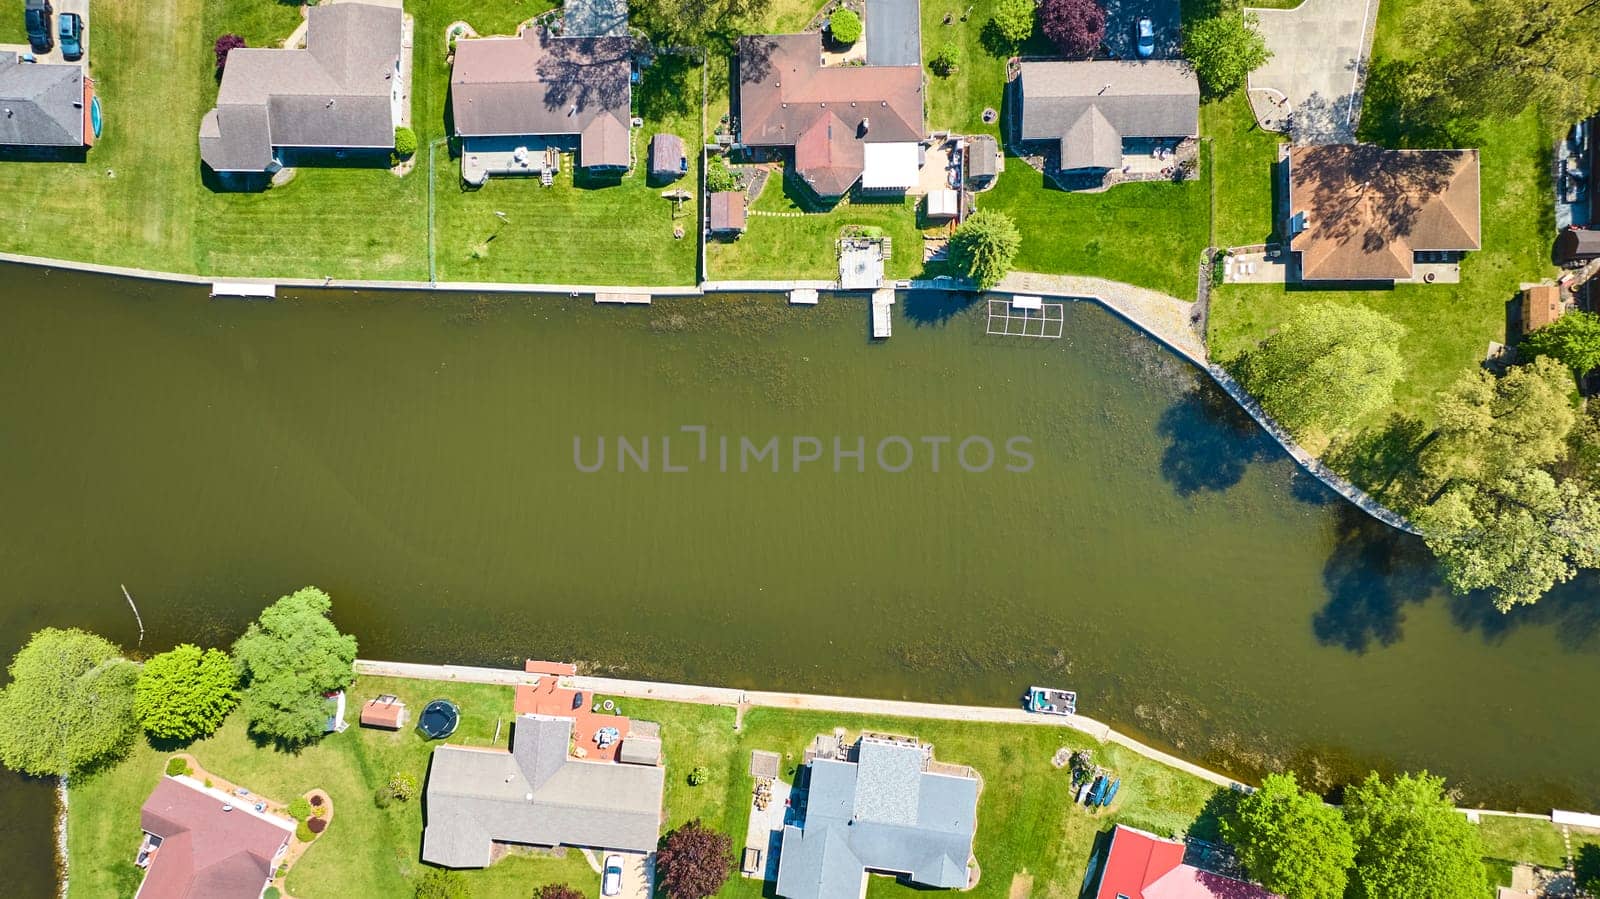 Aerial view of a peaceful riverfront neighborhood in Warsaw, Indiana, showcasing affluent suburban living.